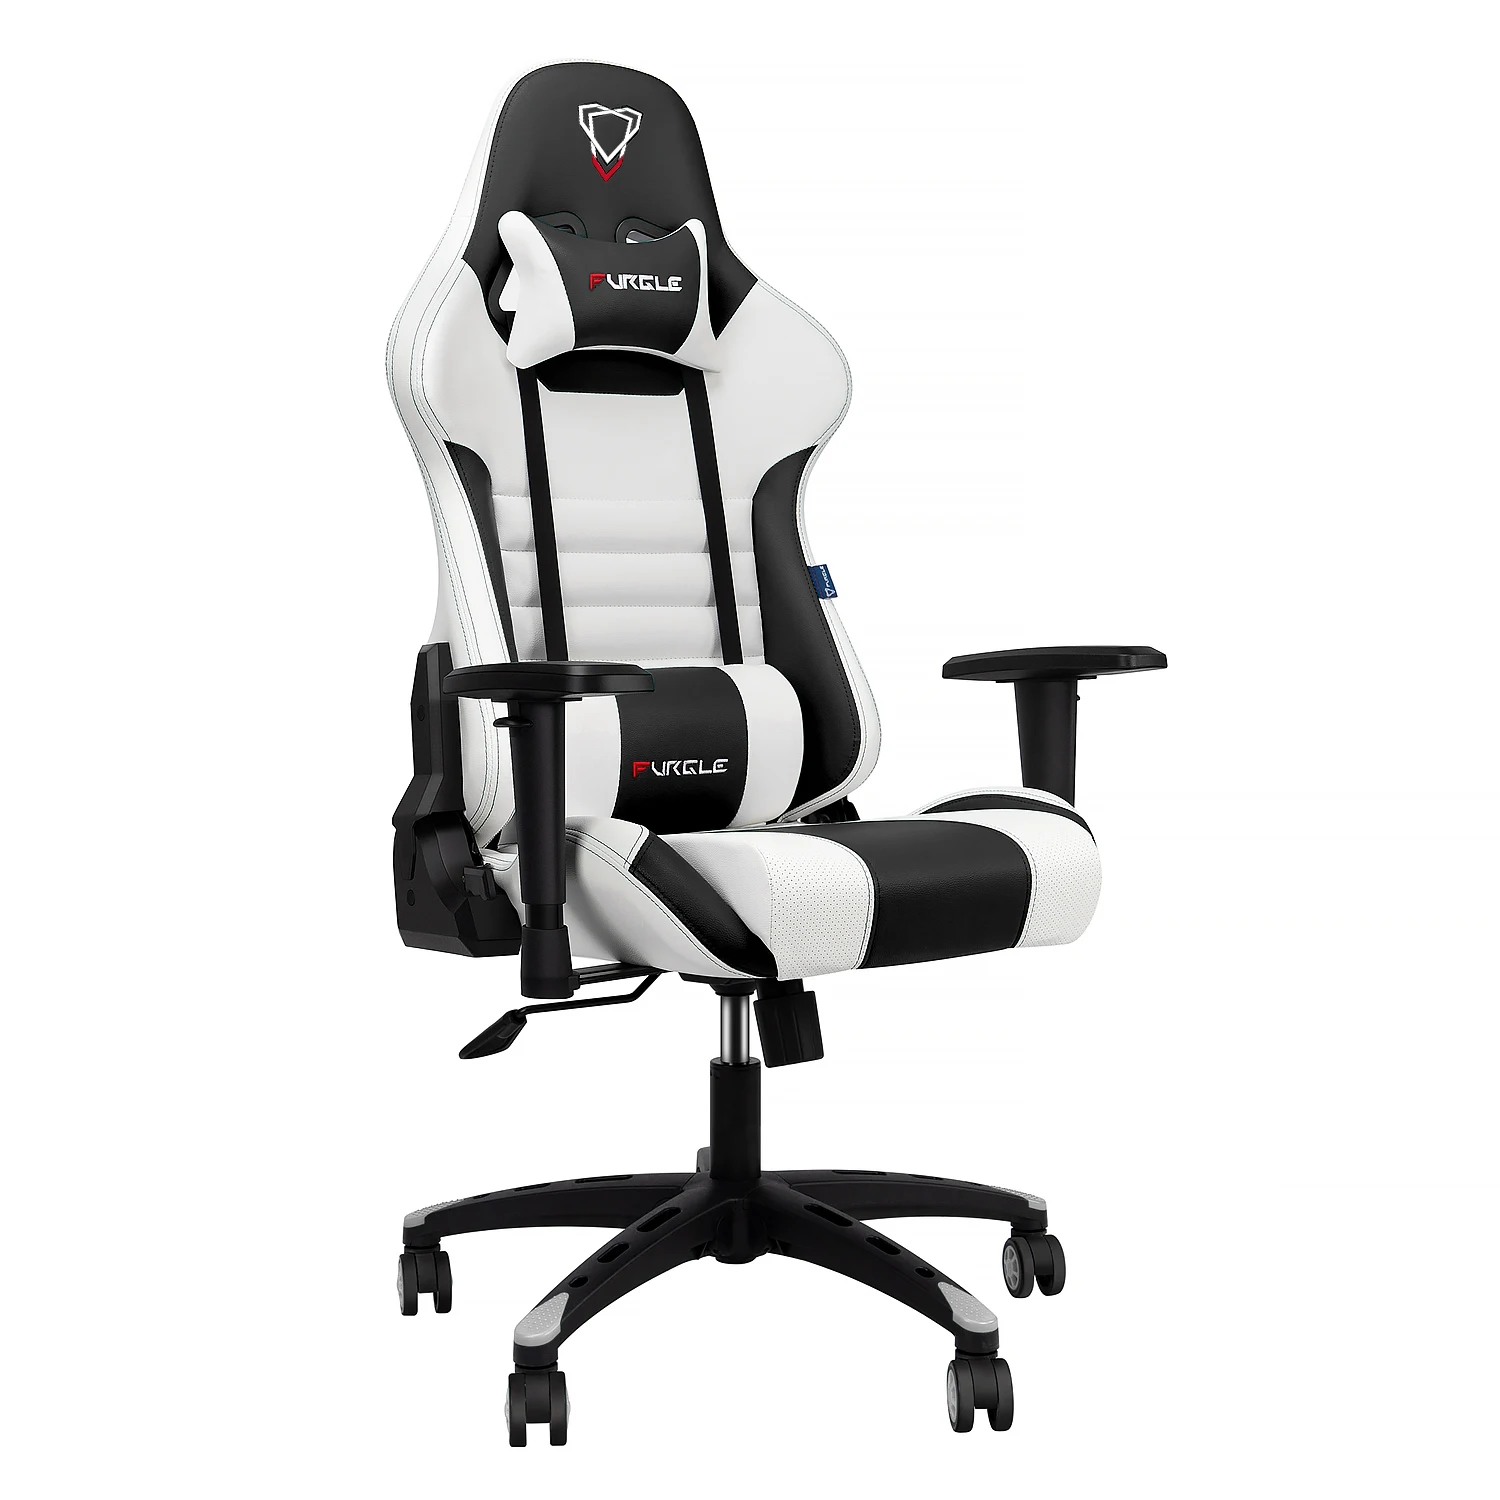 

2021 Pro Gaming Chair Safe&Durable Office Chair Ergonomic Leather Boss Chair for WCG Game Computer Chair Heavy-duty Chairs